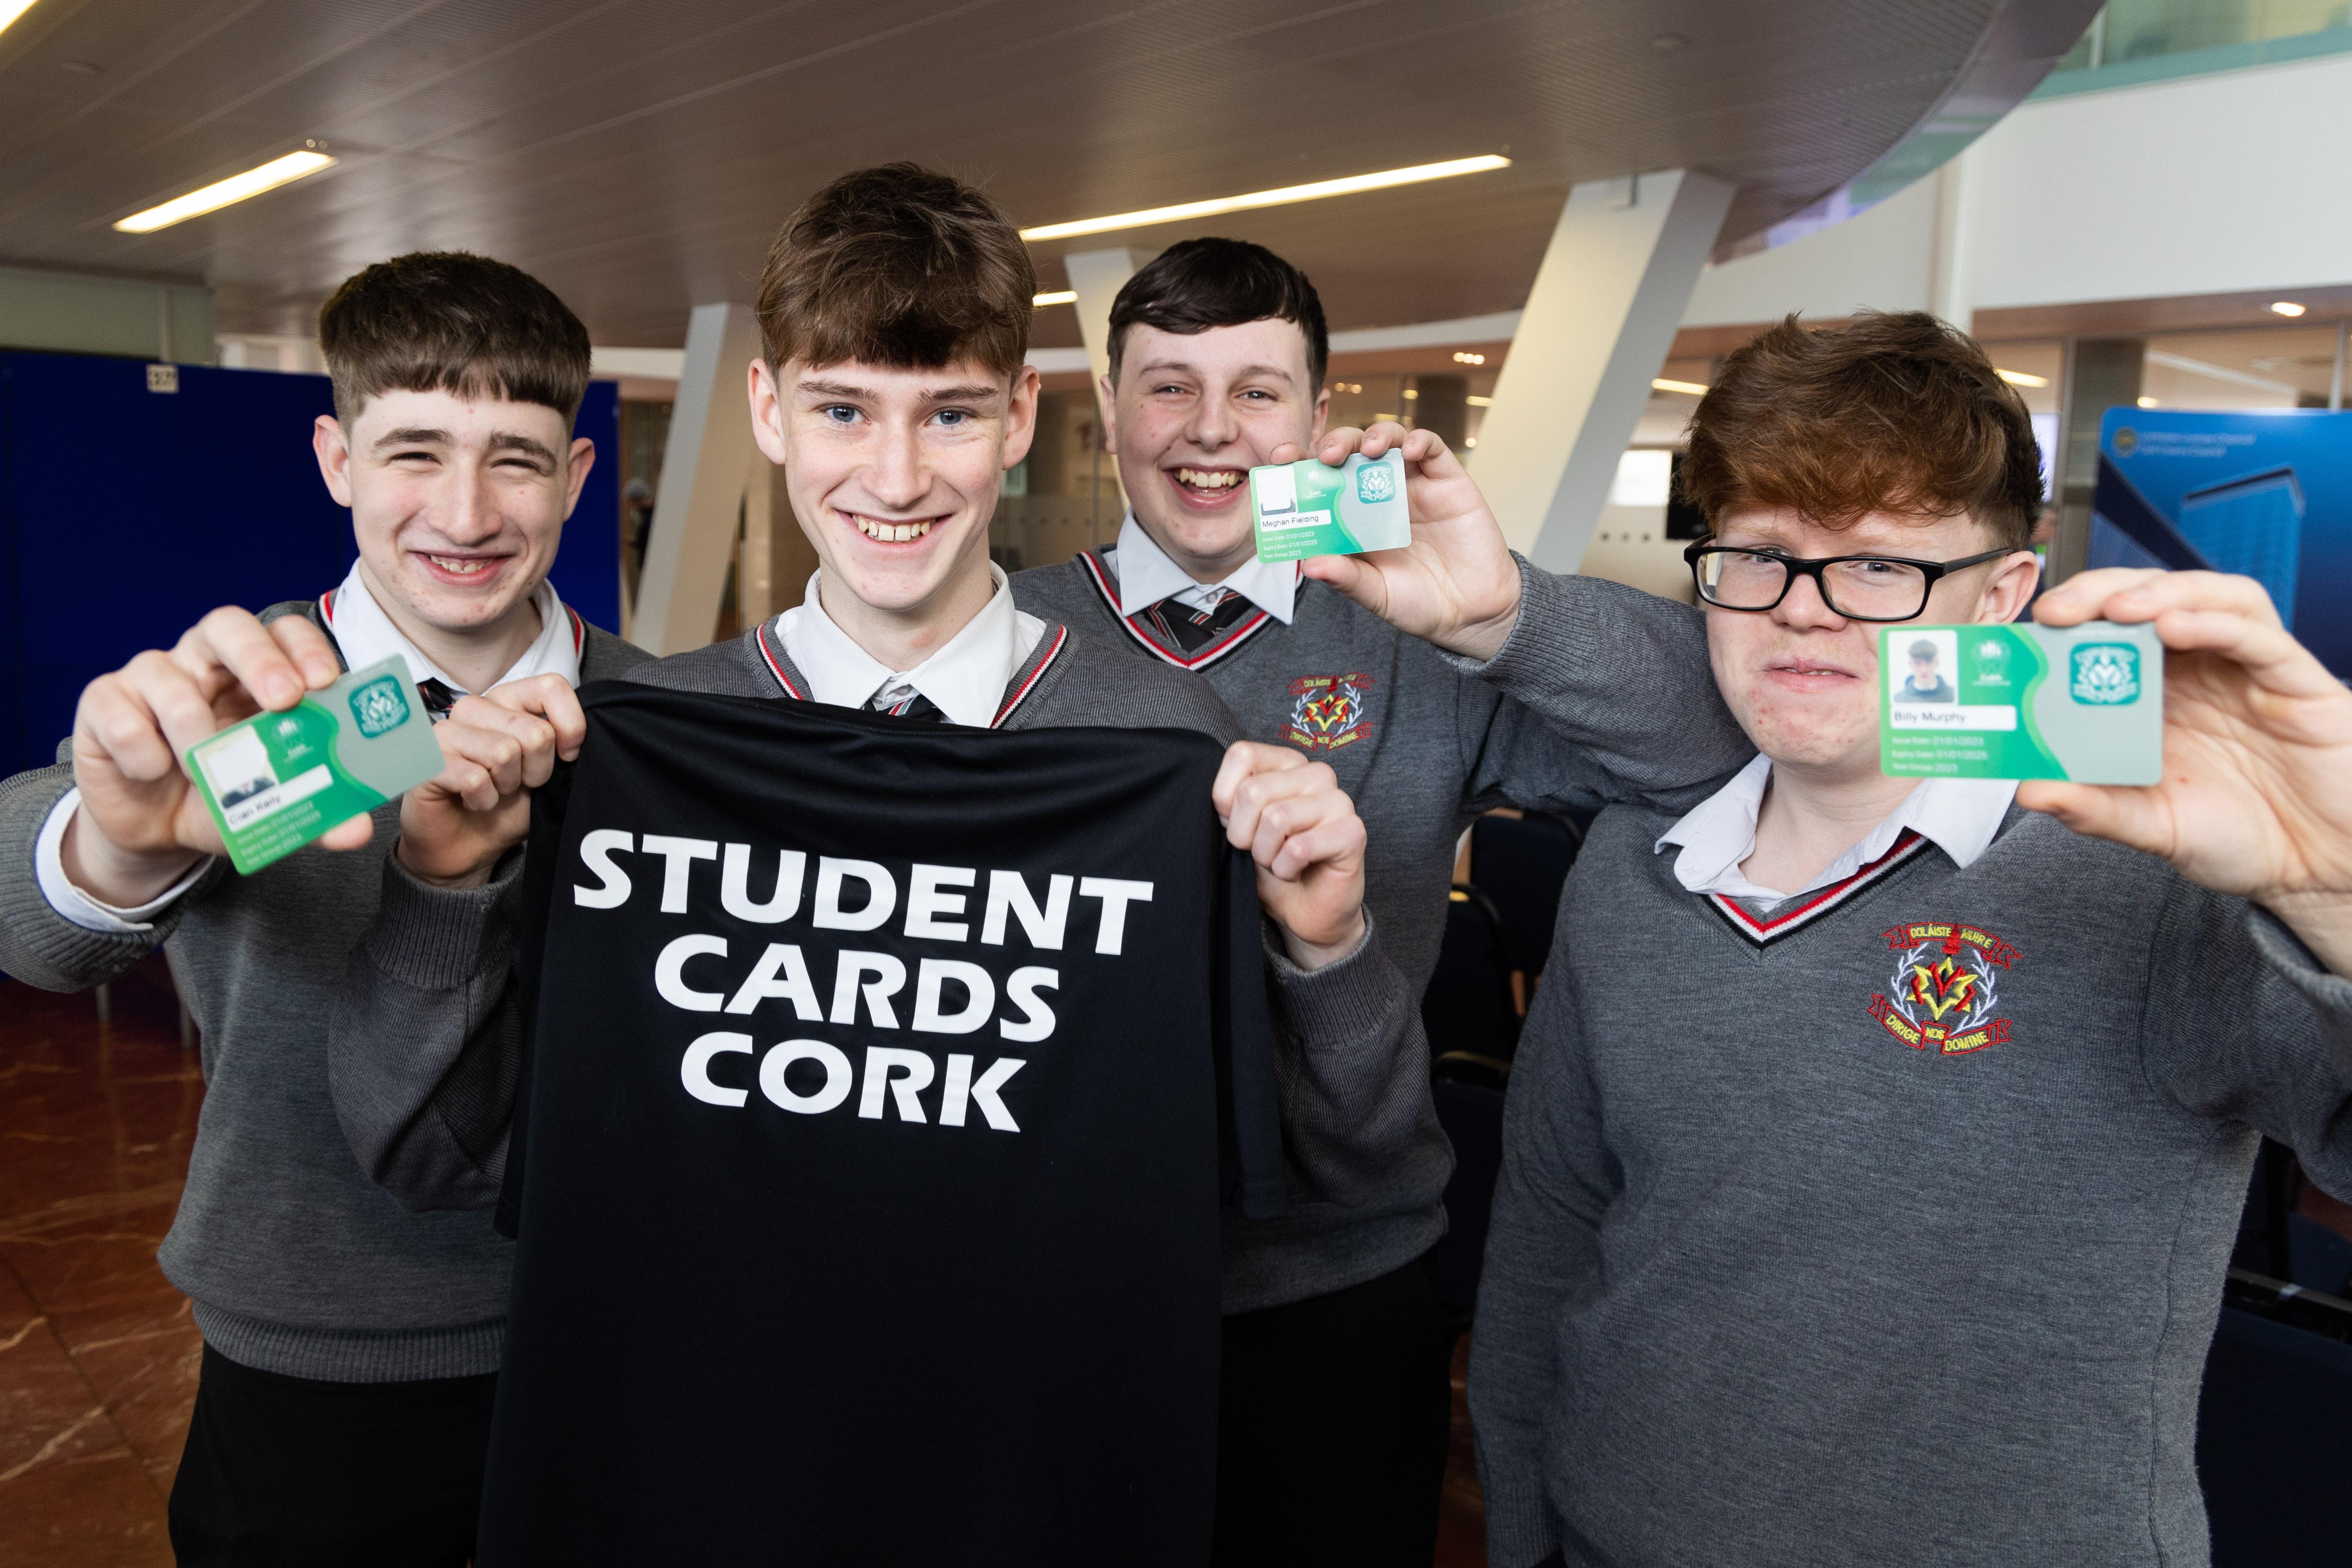 students from Colaiste Muire, Cobh won 2nd place in the Senior Category.  The winning students were Ben Hamilton, Billy Murphy, Callum Gormley Barrett and Adam O' Leary